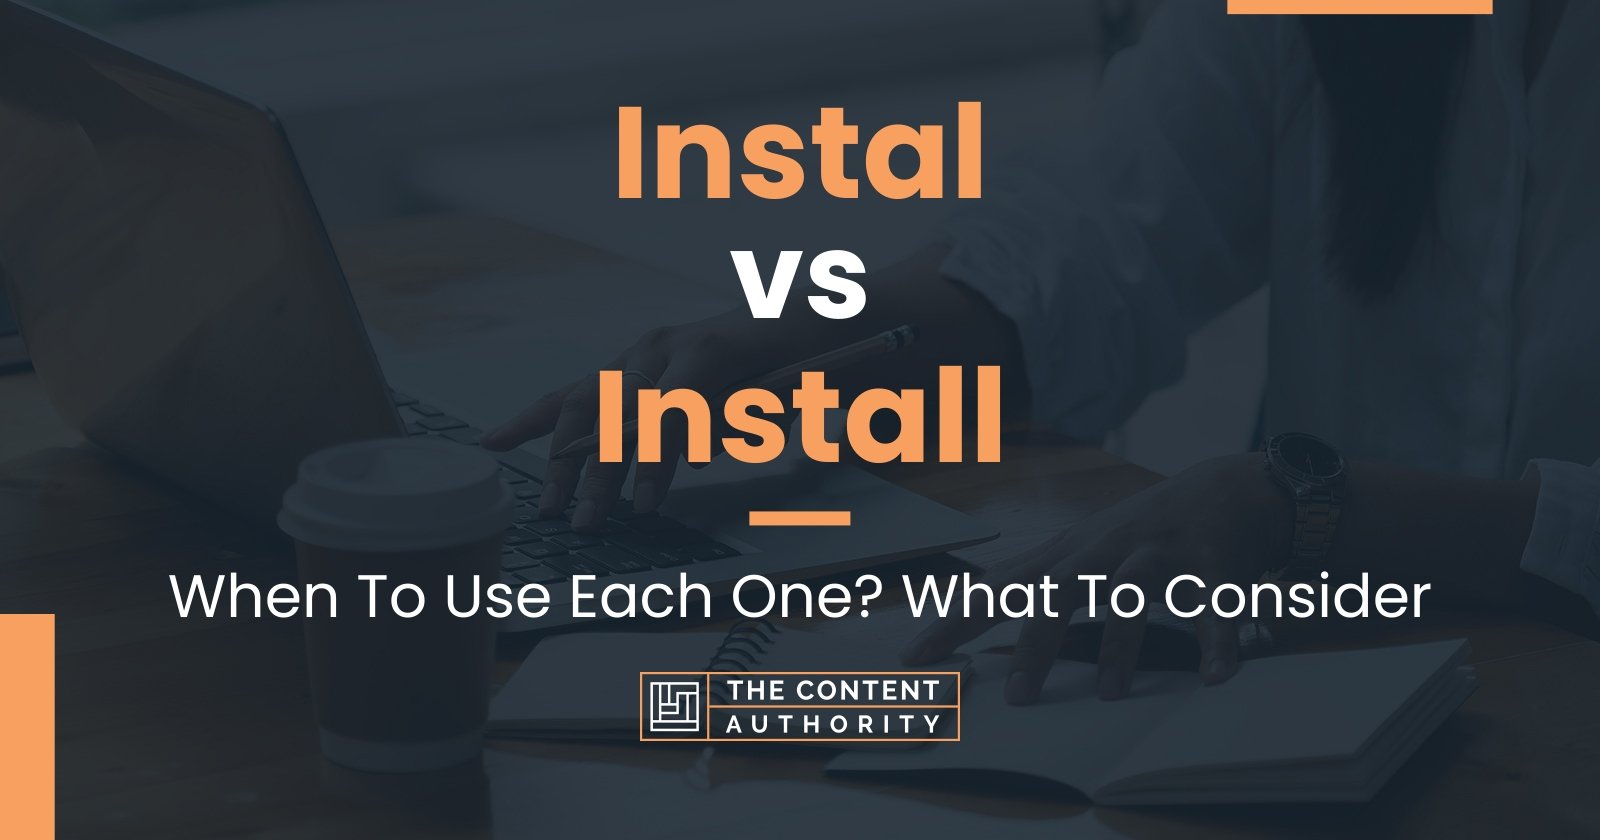 Instal vs Install: When To Use Each One? What To Consider